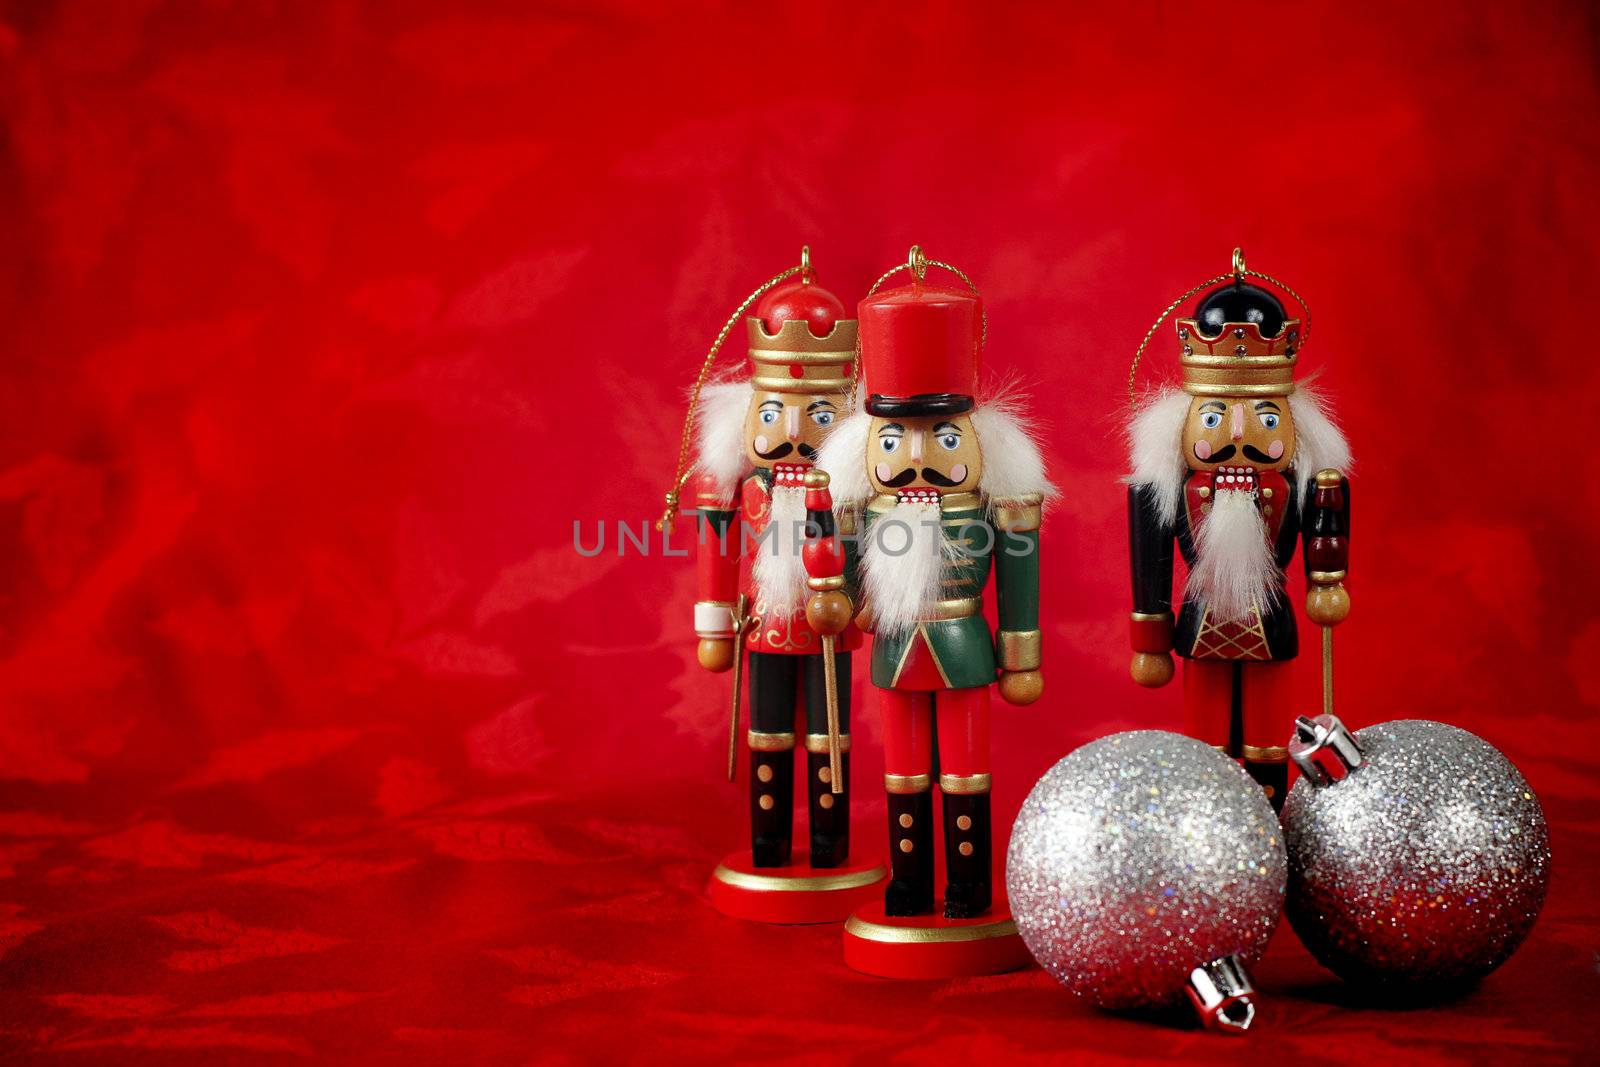 Three nutcrackers stand on red Christmas background with ornaments